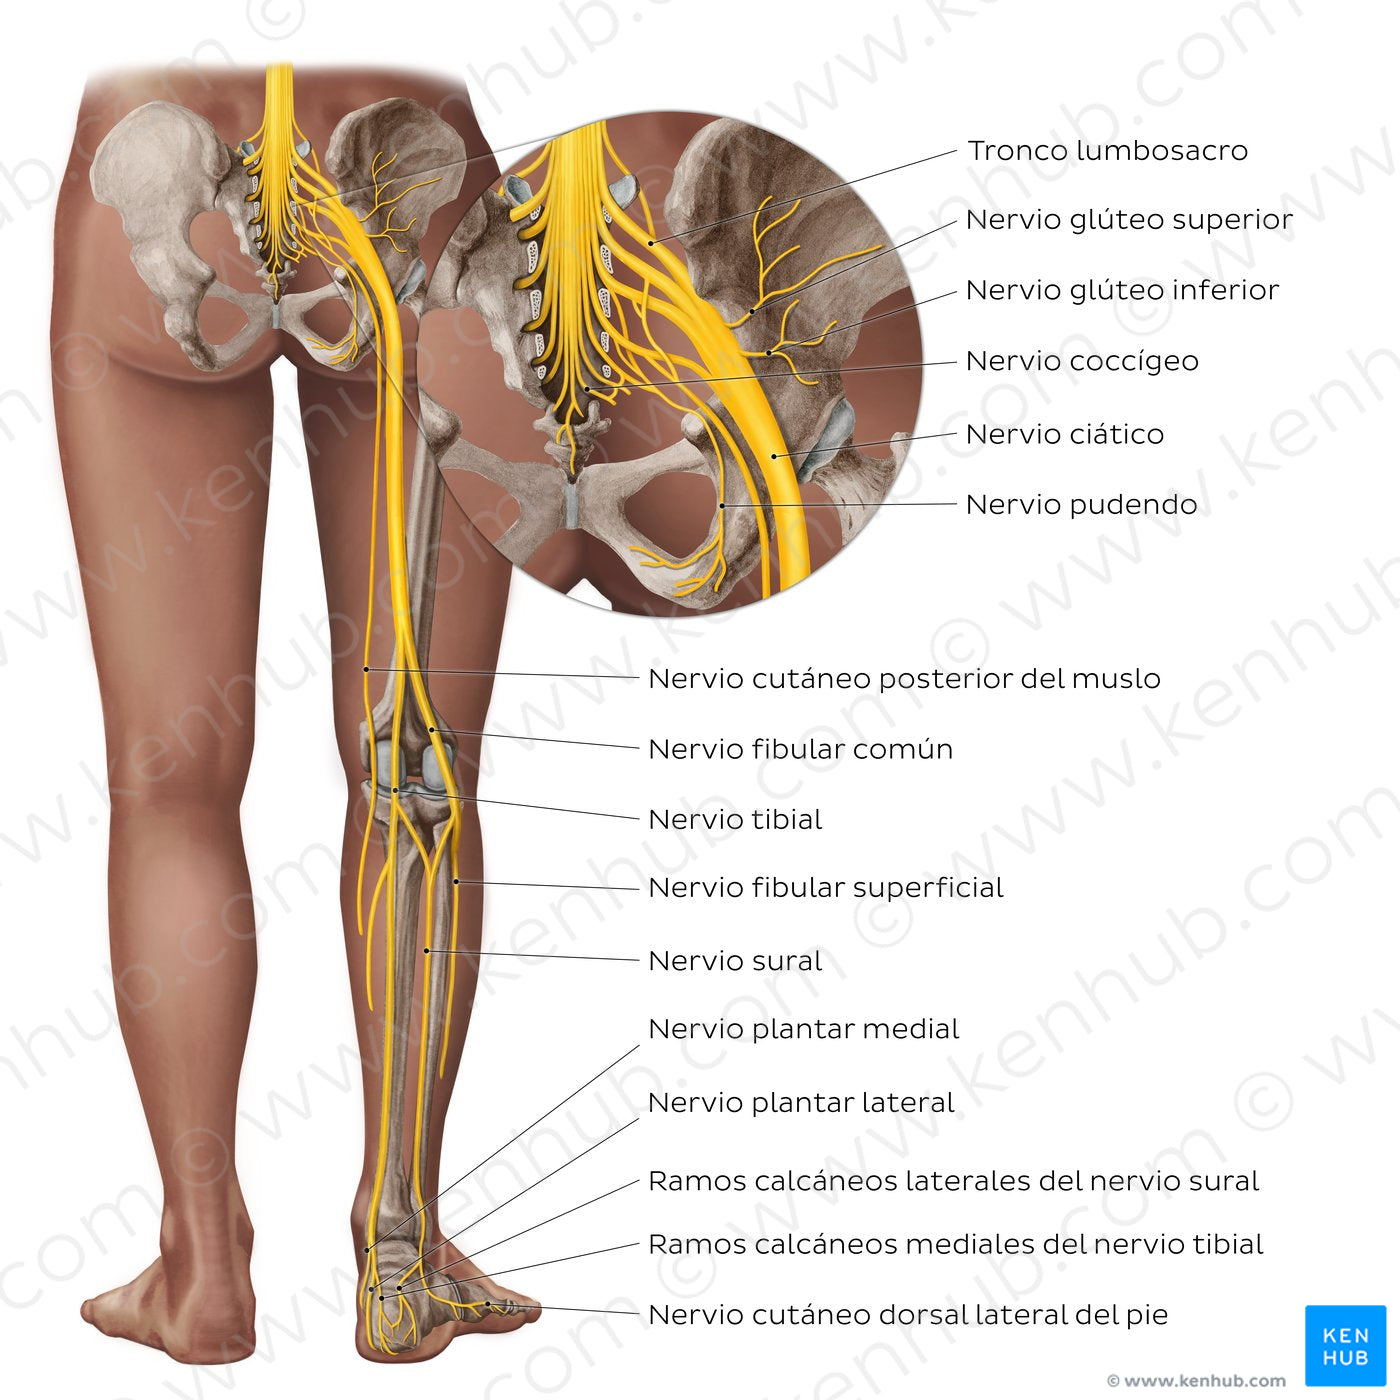 Sciatic nerve and its branches (Spanish)